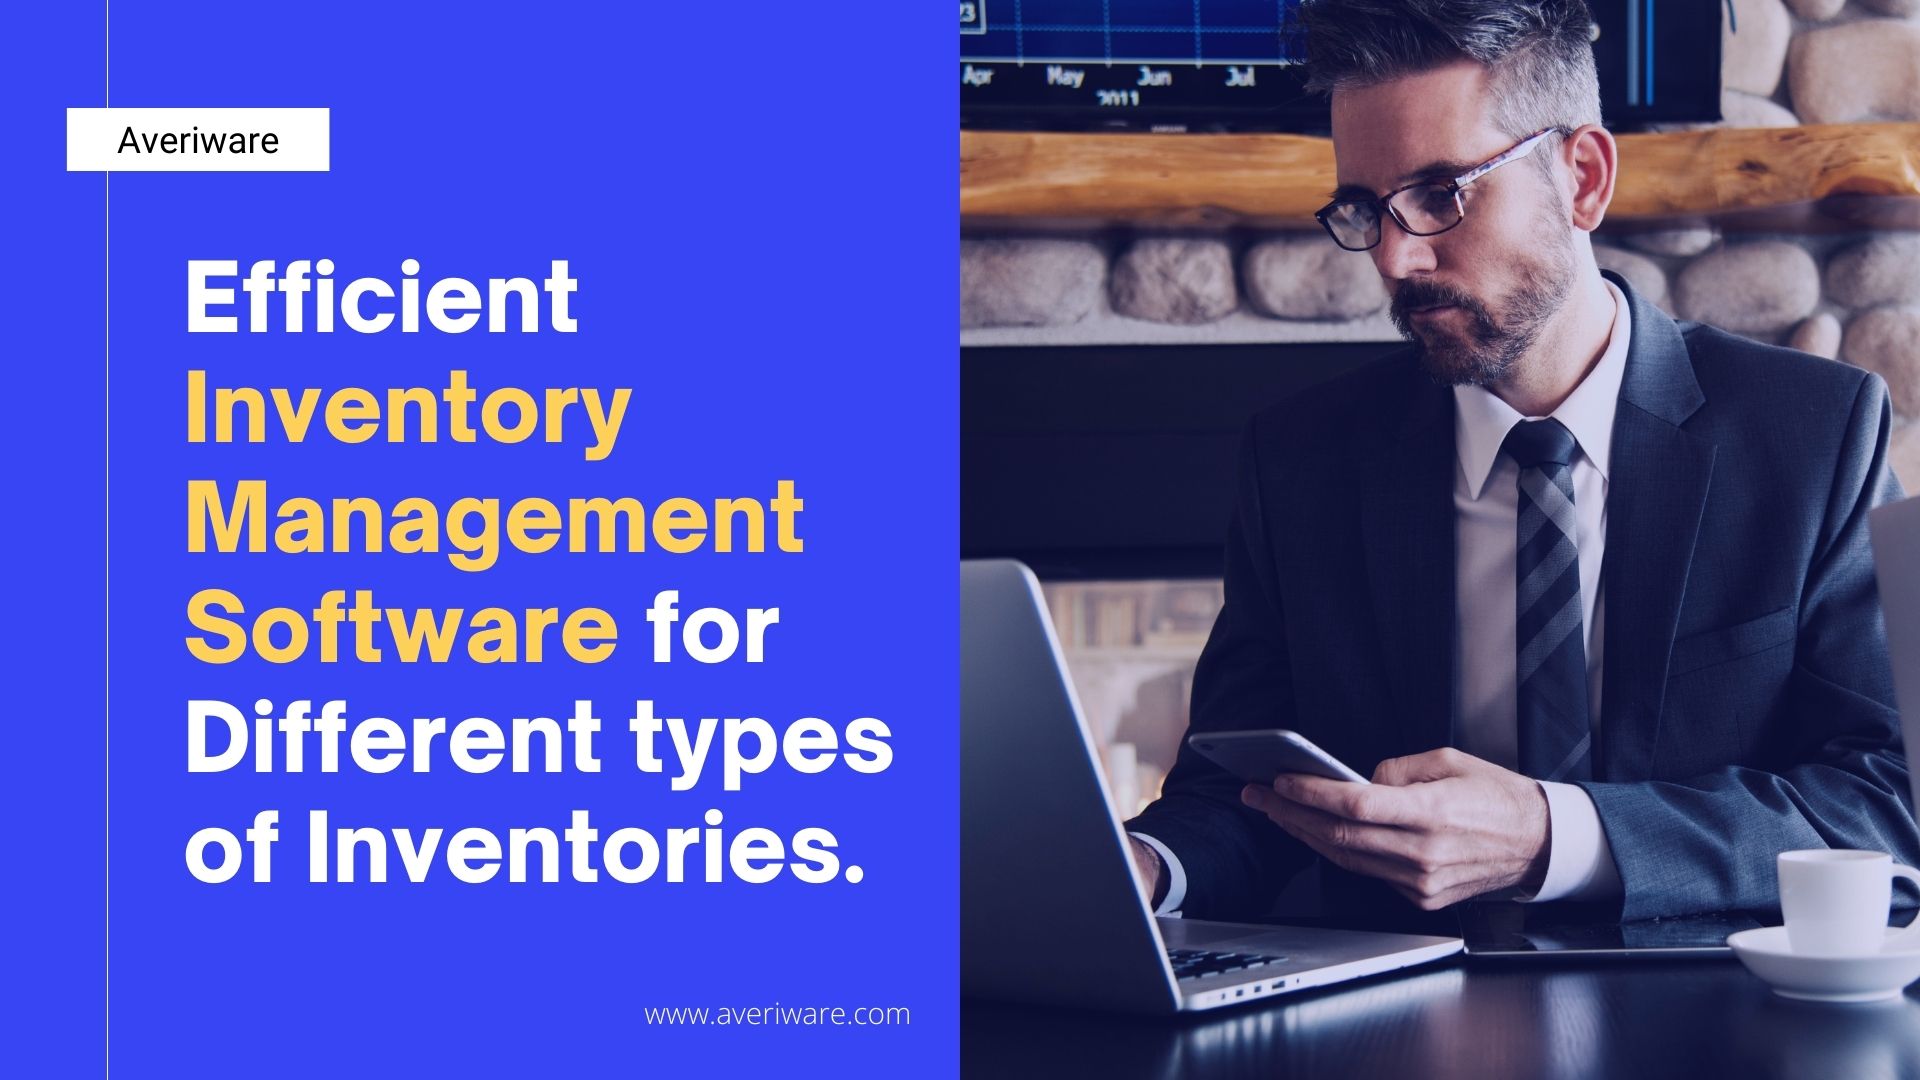 Efficient Inventory Management Software for Different types of Inventories